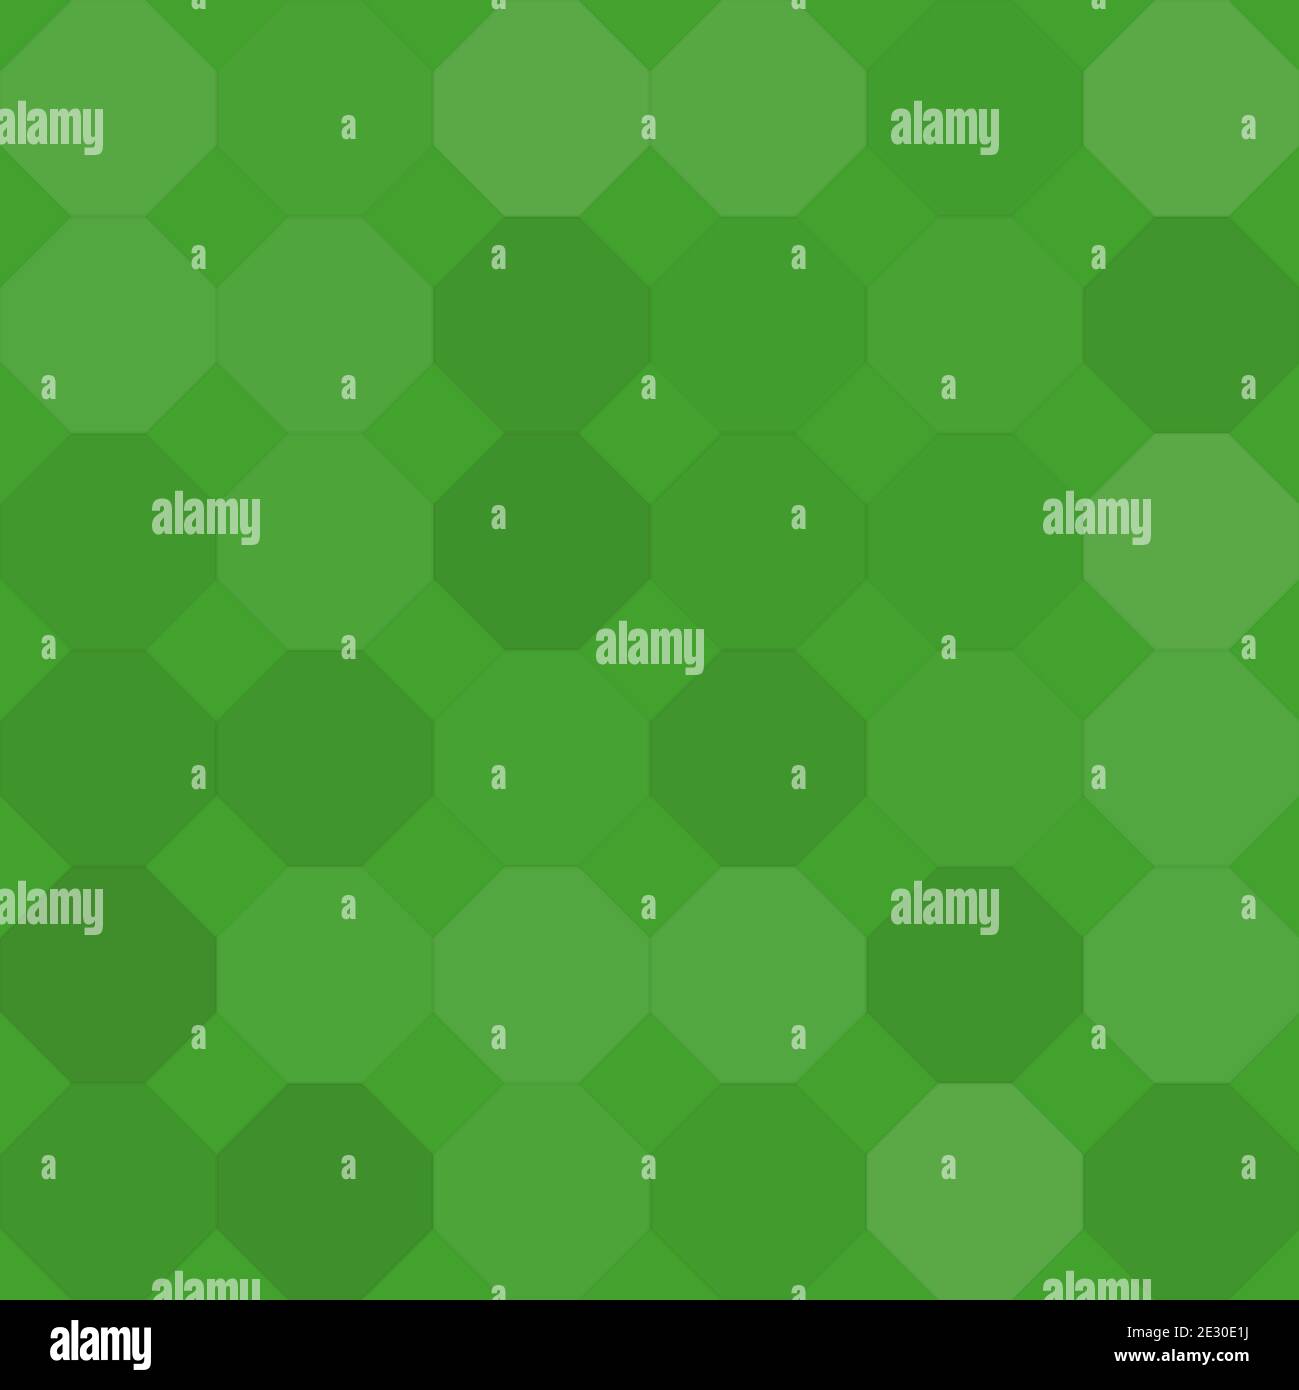 Large Seamless Computer Generated Abstract Green Pastel Pattern Background Stock Photo